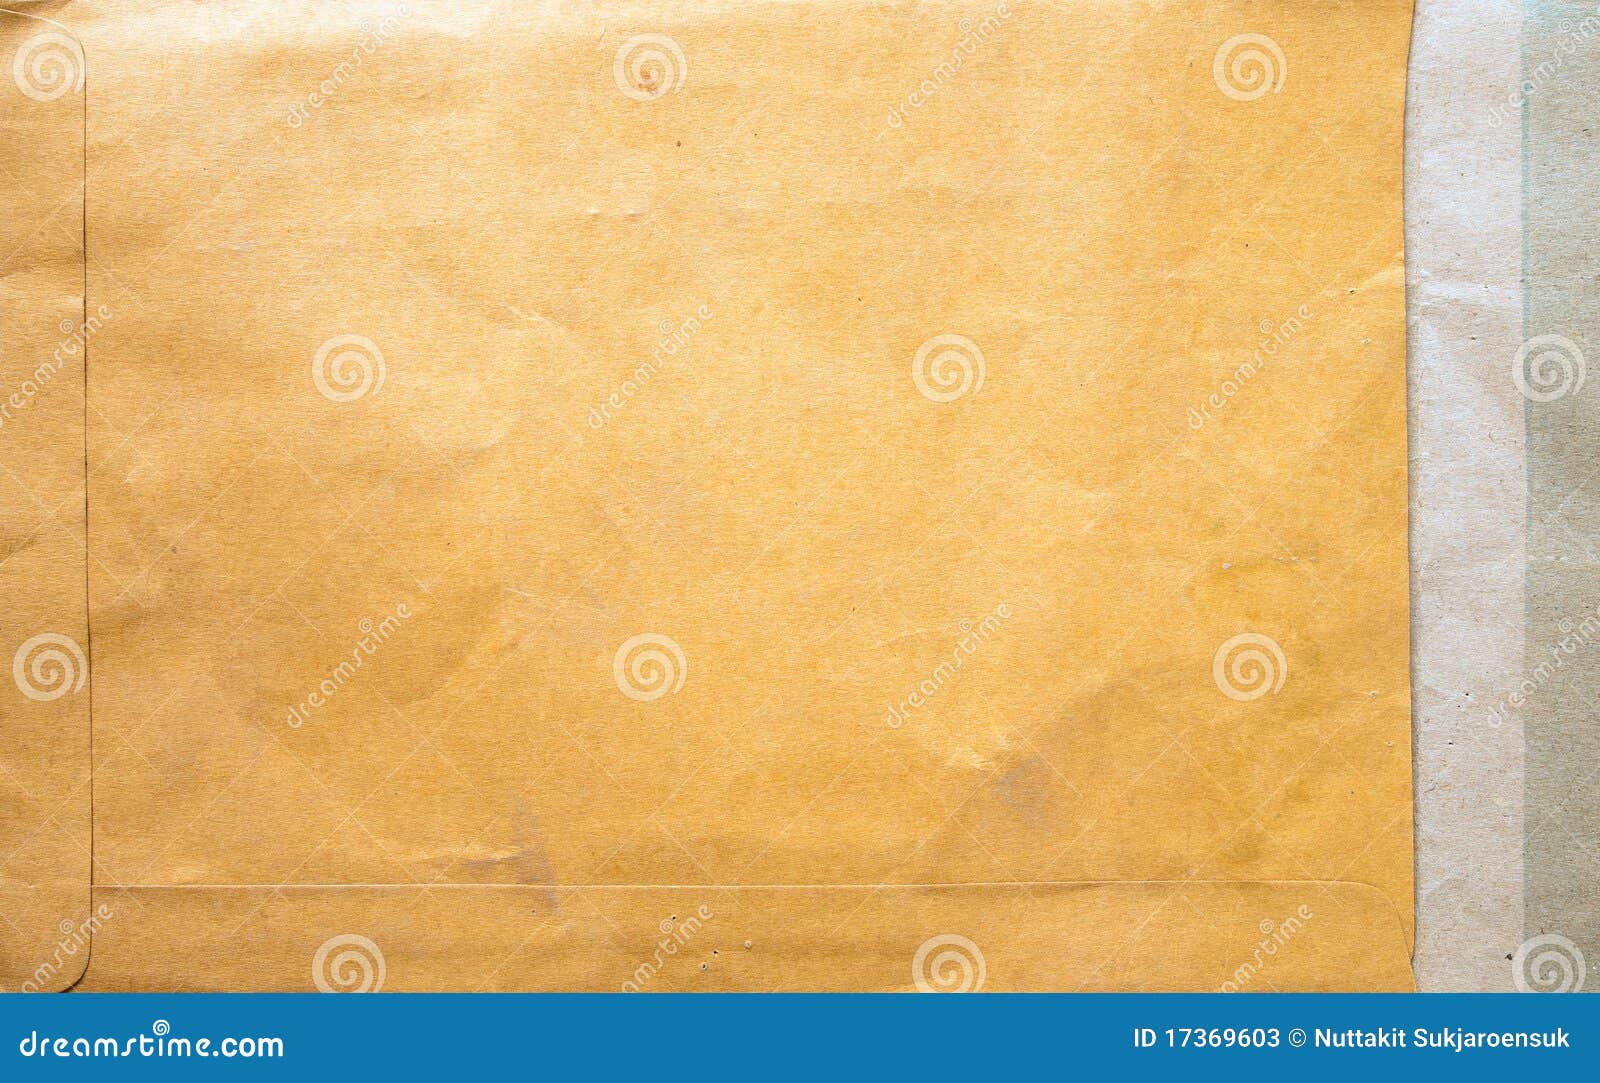 Brown Paper Bag Stock Image Image Of Package Frame 17369603